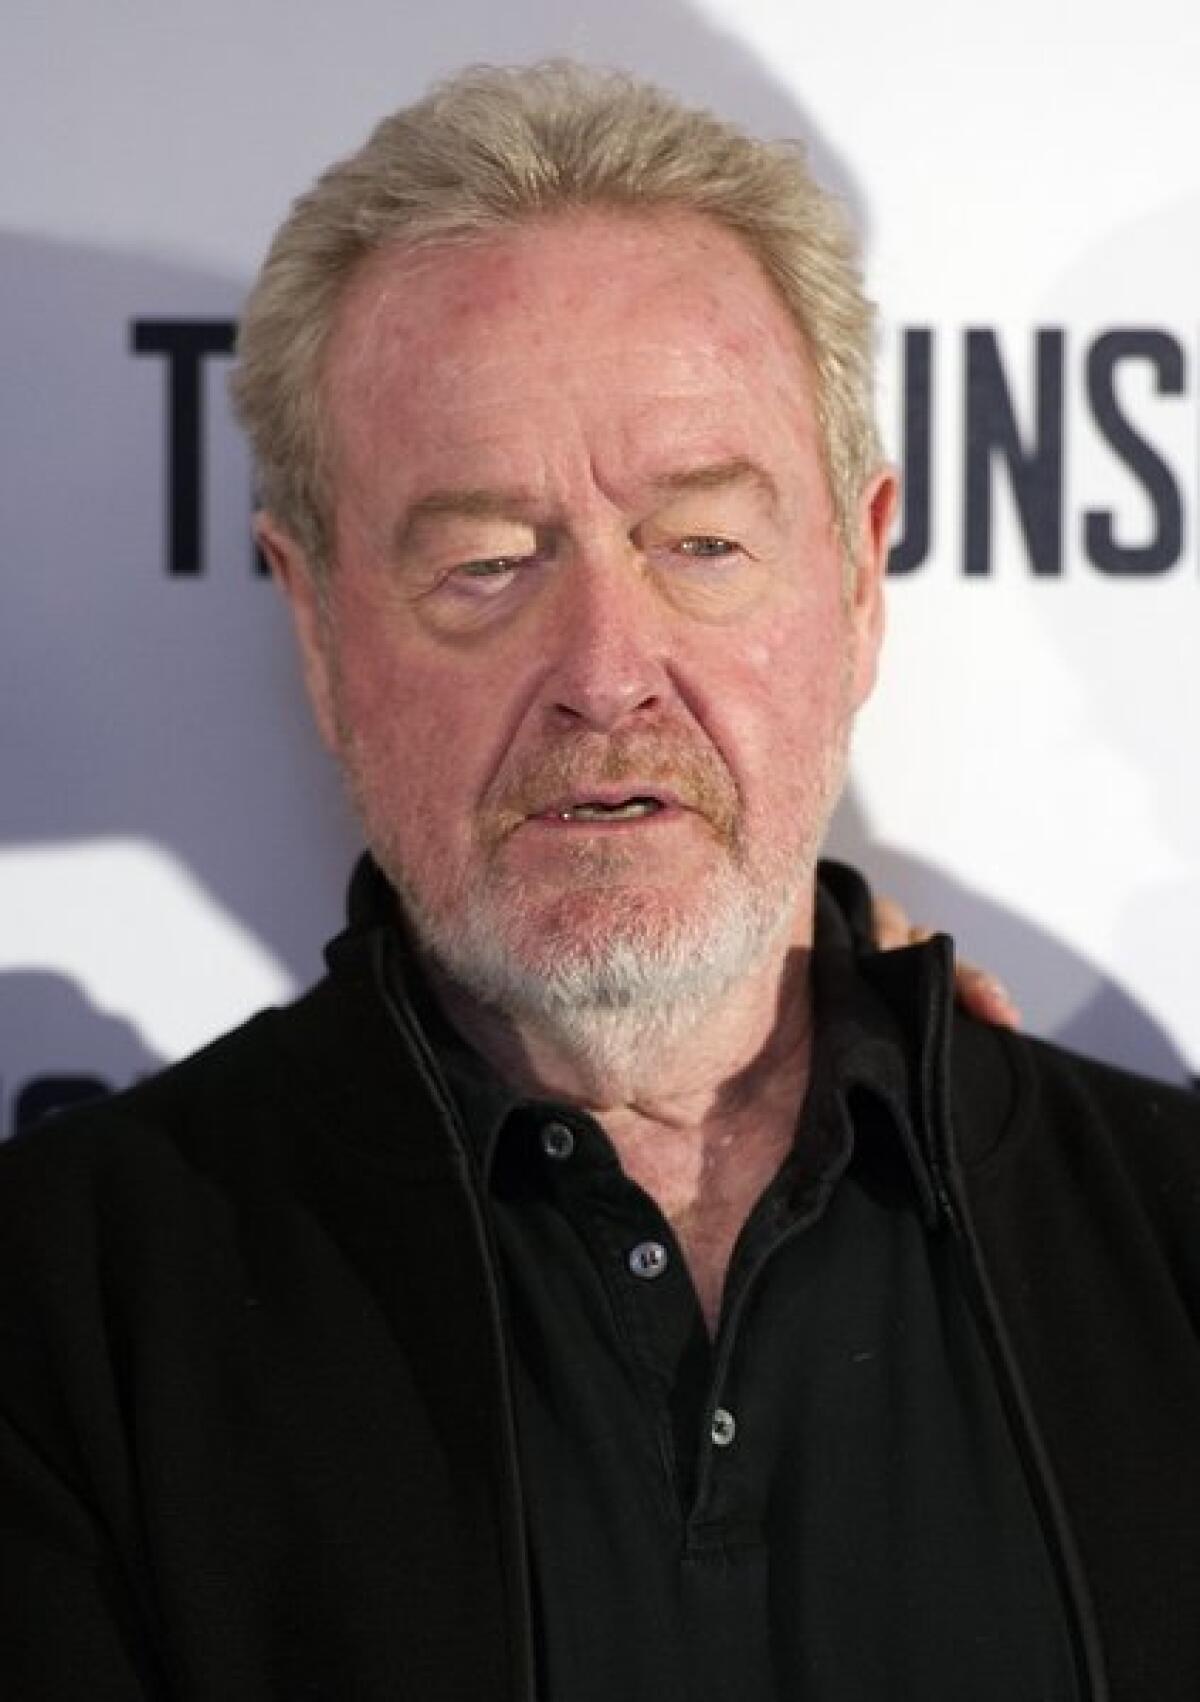 A planned collaboration between director Ridley Scott, above, and the Machinima online gaming network has fizzled due to scheduling issues.